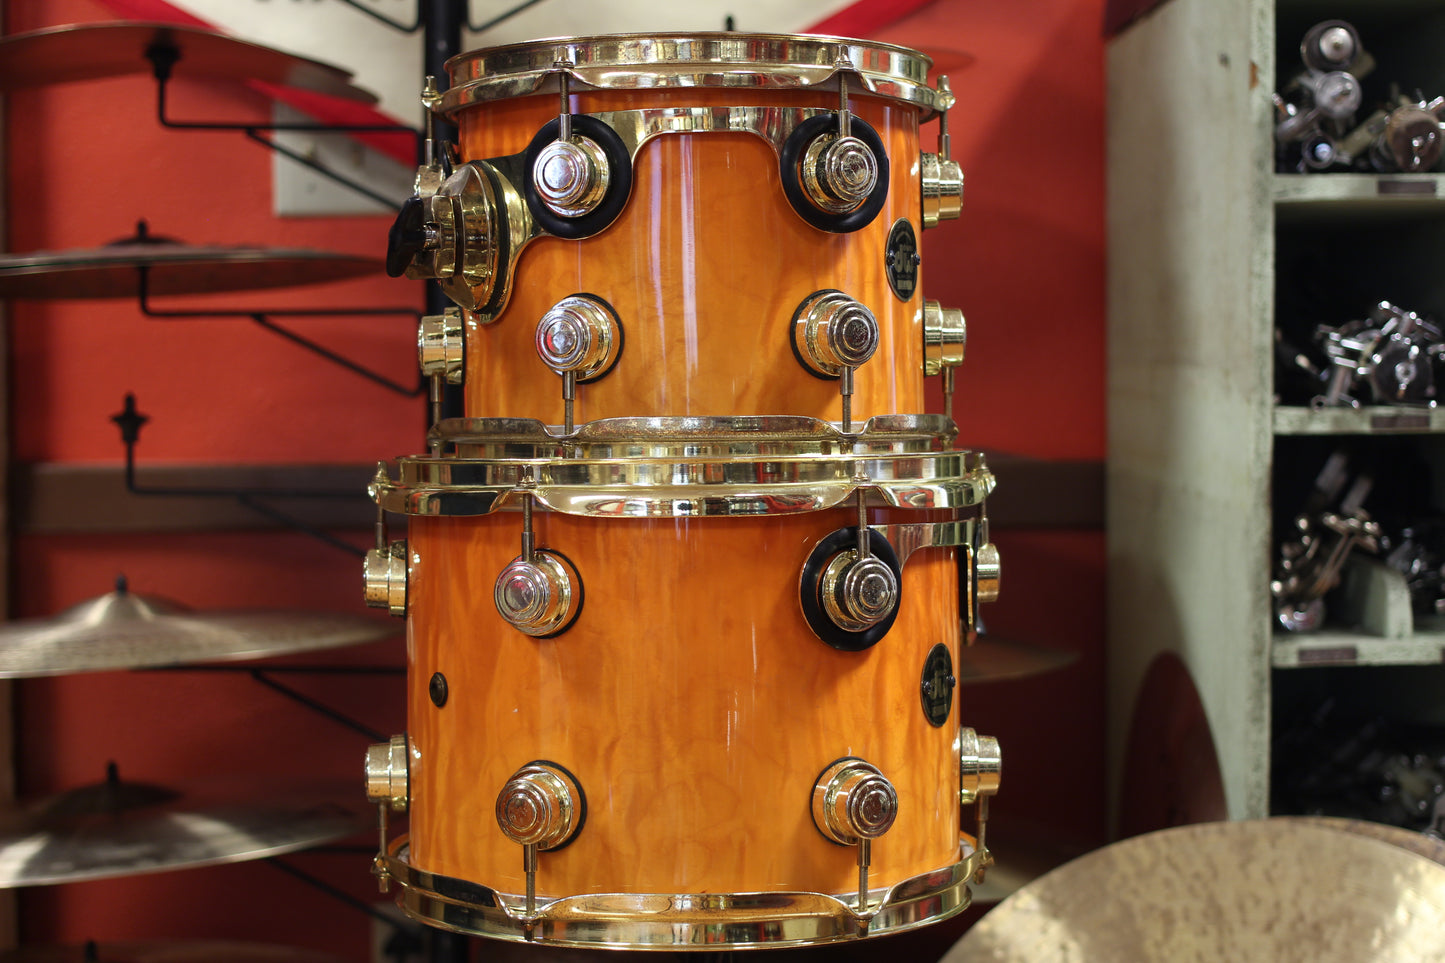 2000 DW Collectors Series in Curly Maple Classic Burst 18x22 13x16 11x14 9x12 8x10